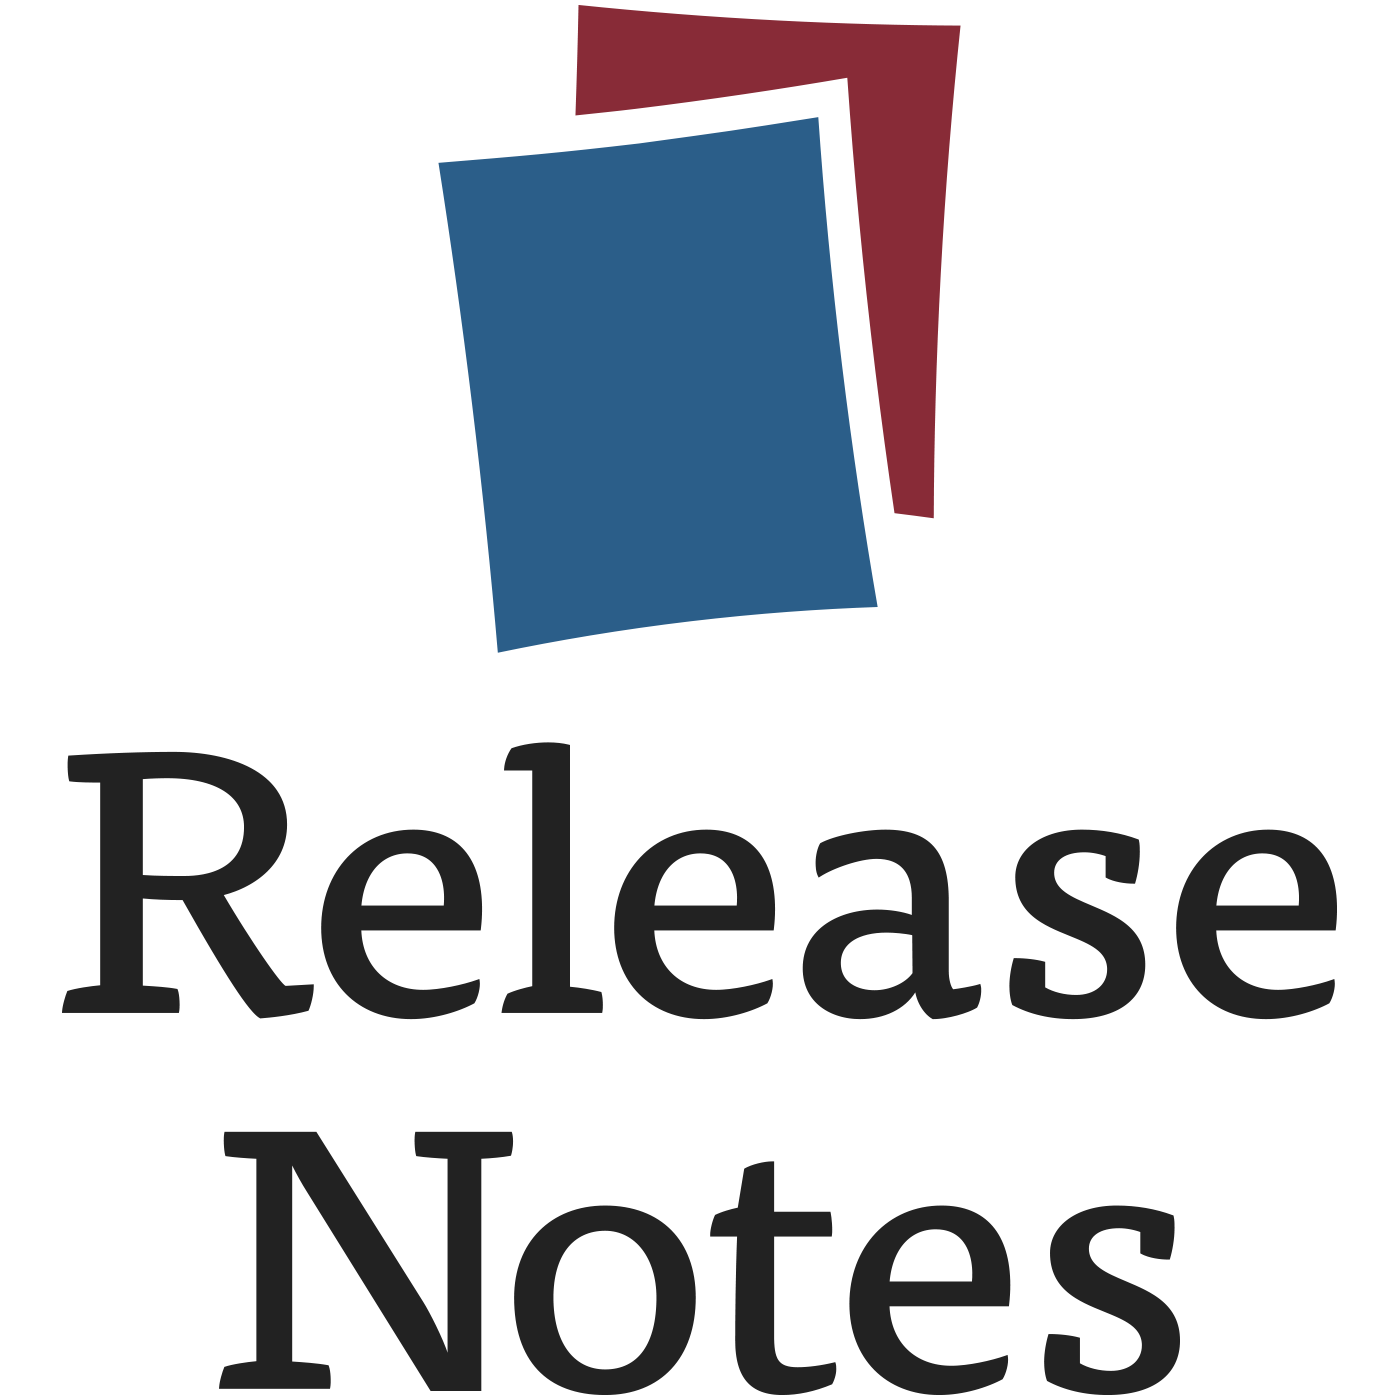 Лайк ноте. Release Notes. Release Notes logo. Release Notes по. Good Notes логотип.